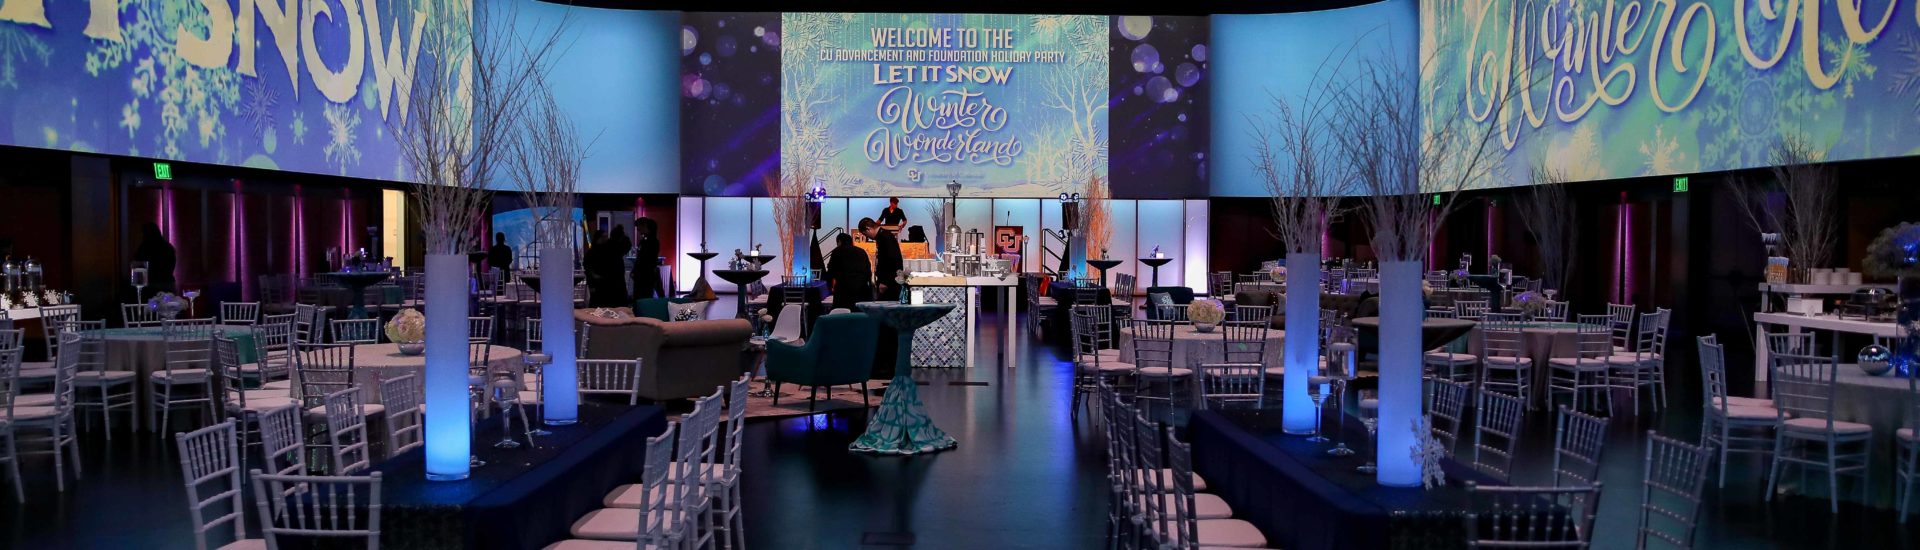 Inside an open venue set up for a winter holiday party with dimmed lighting, screens showing snowflakes and a variety of tables and chairs set up for a dinner